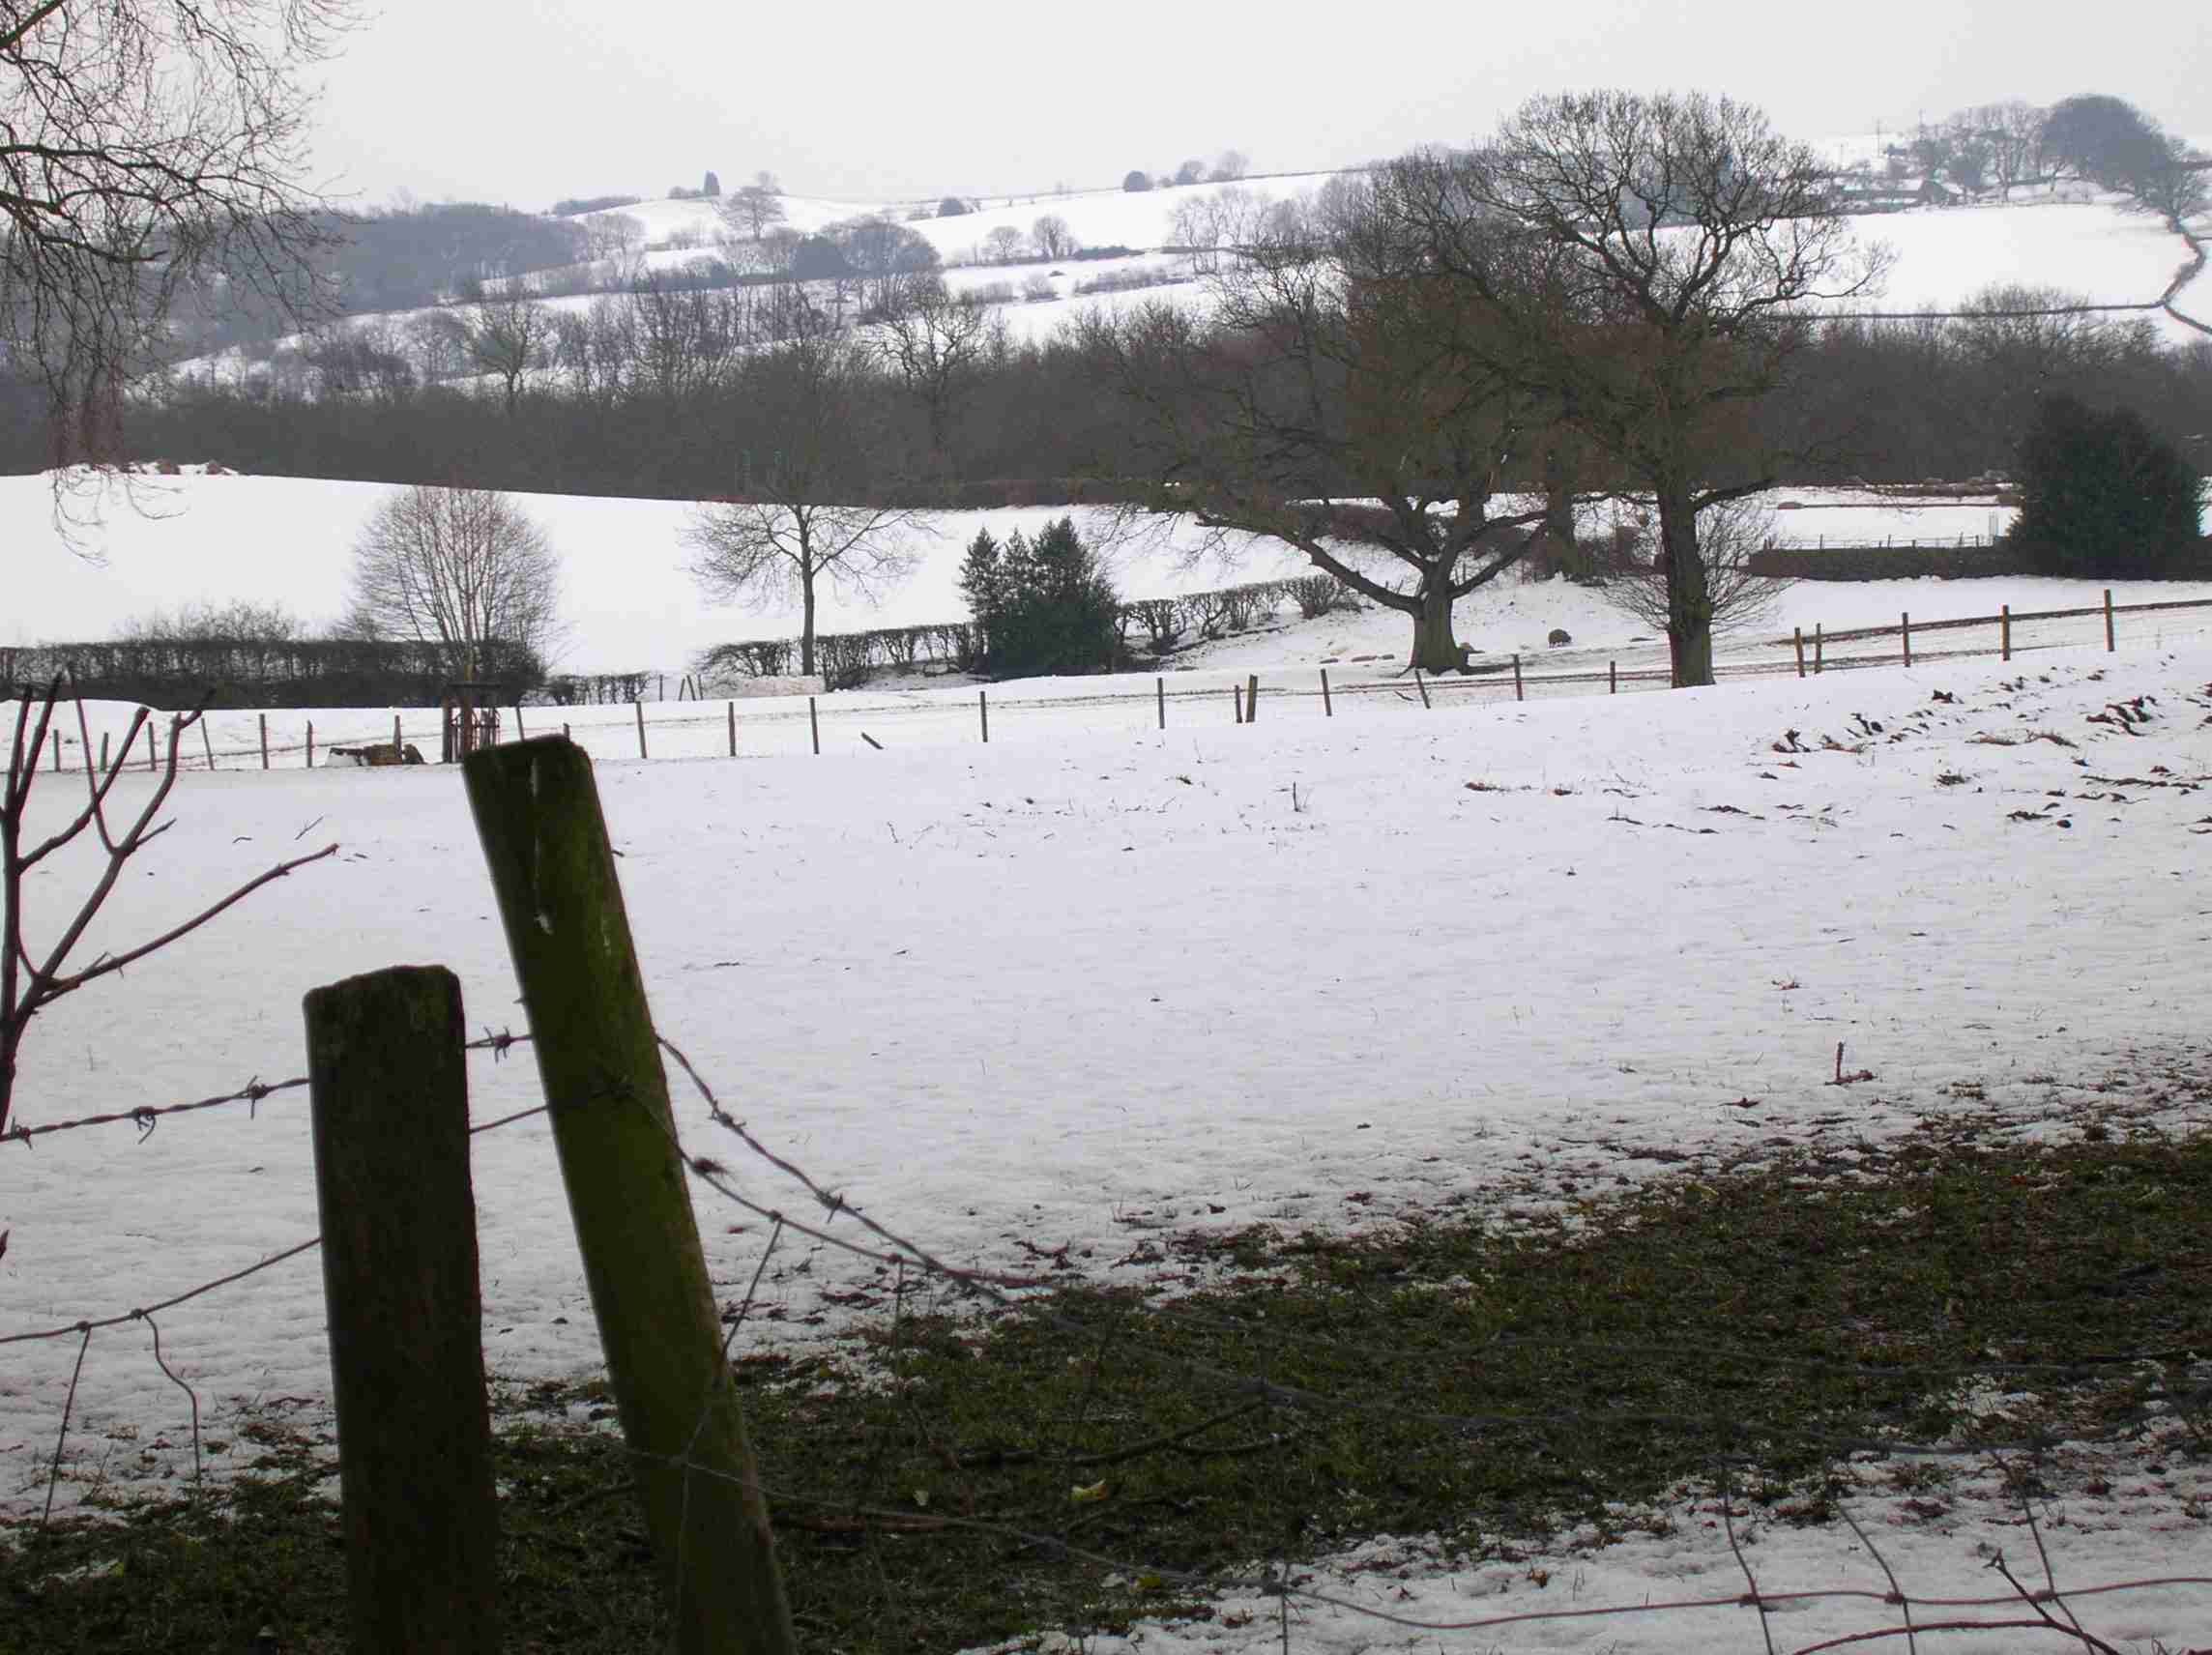 Looking over the fields from TOTLEY HALL LANE